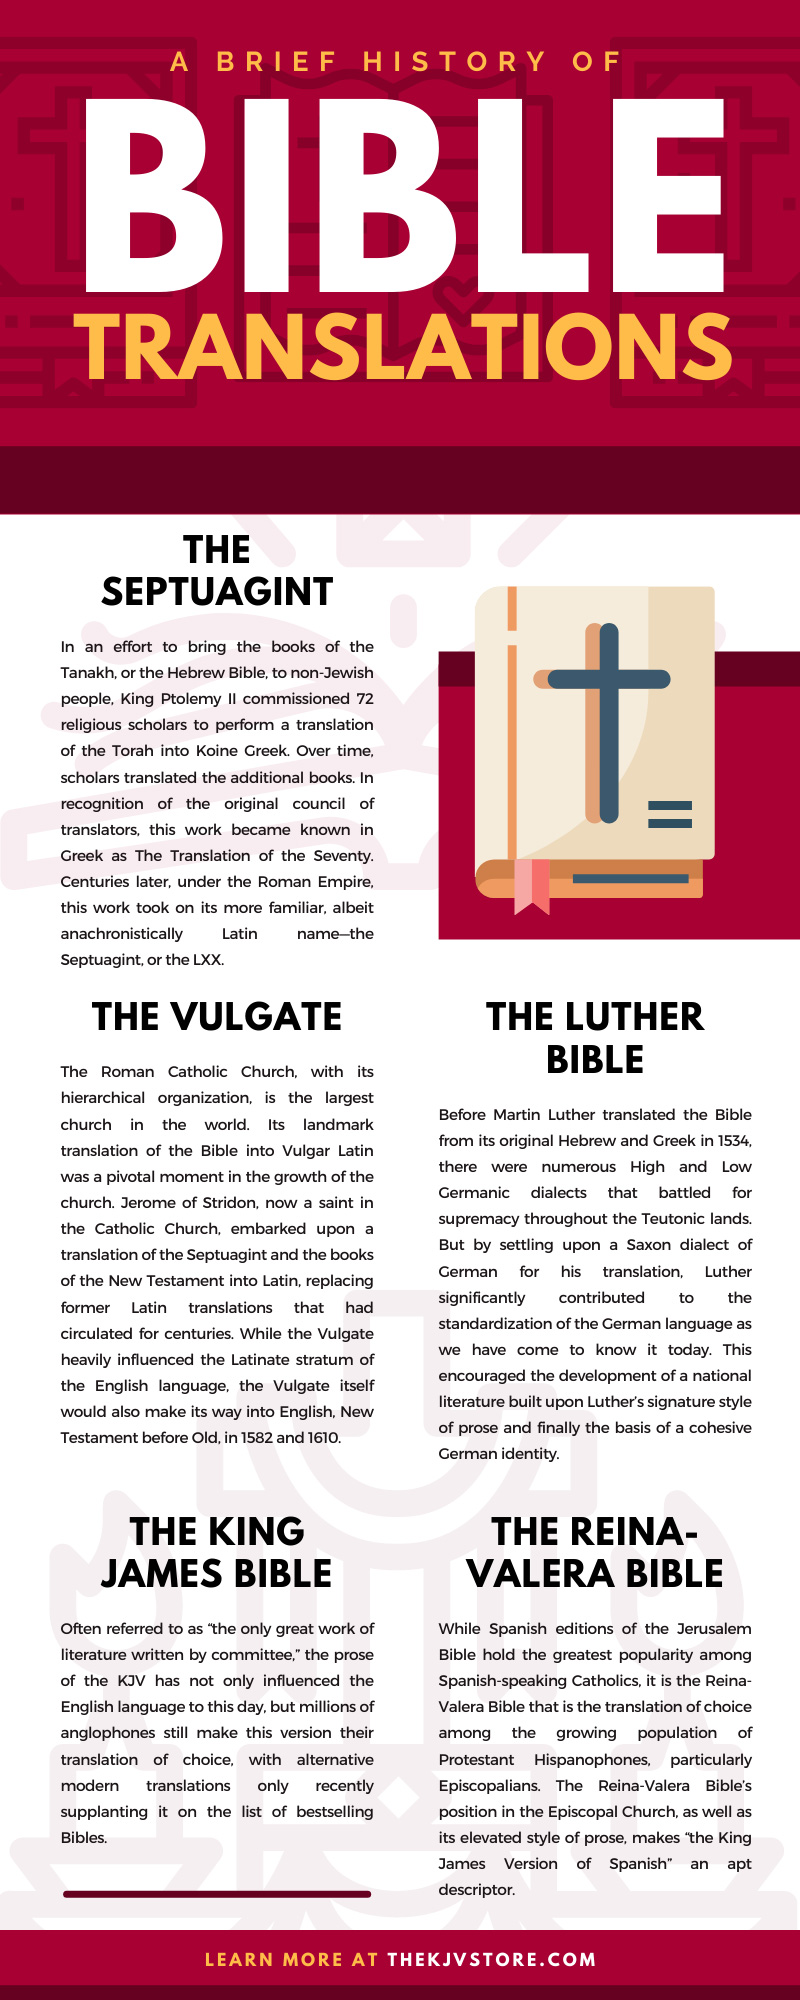 A Brief History of Bible Translations